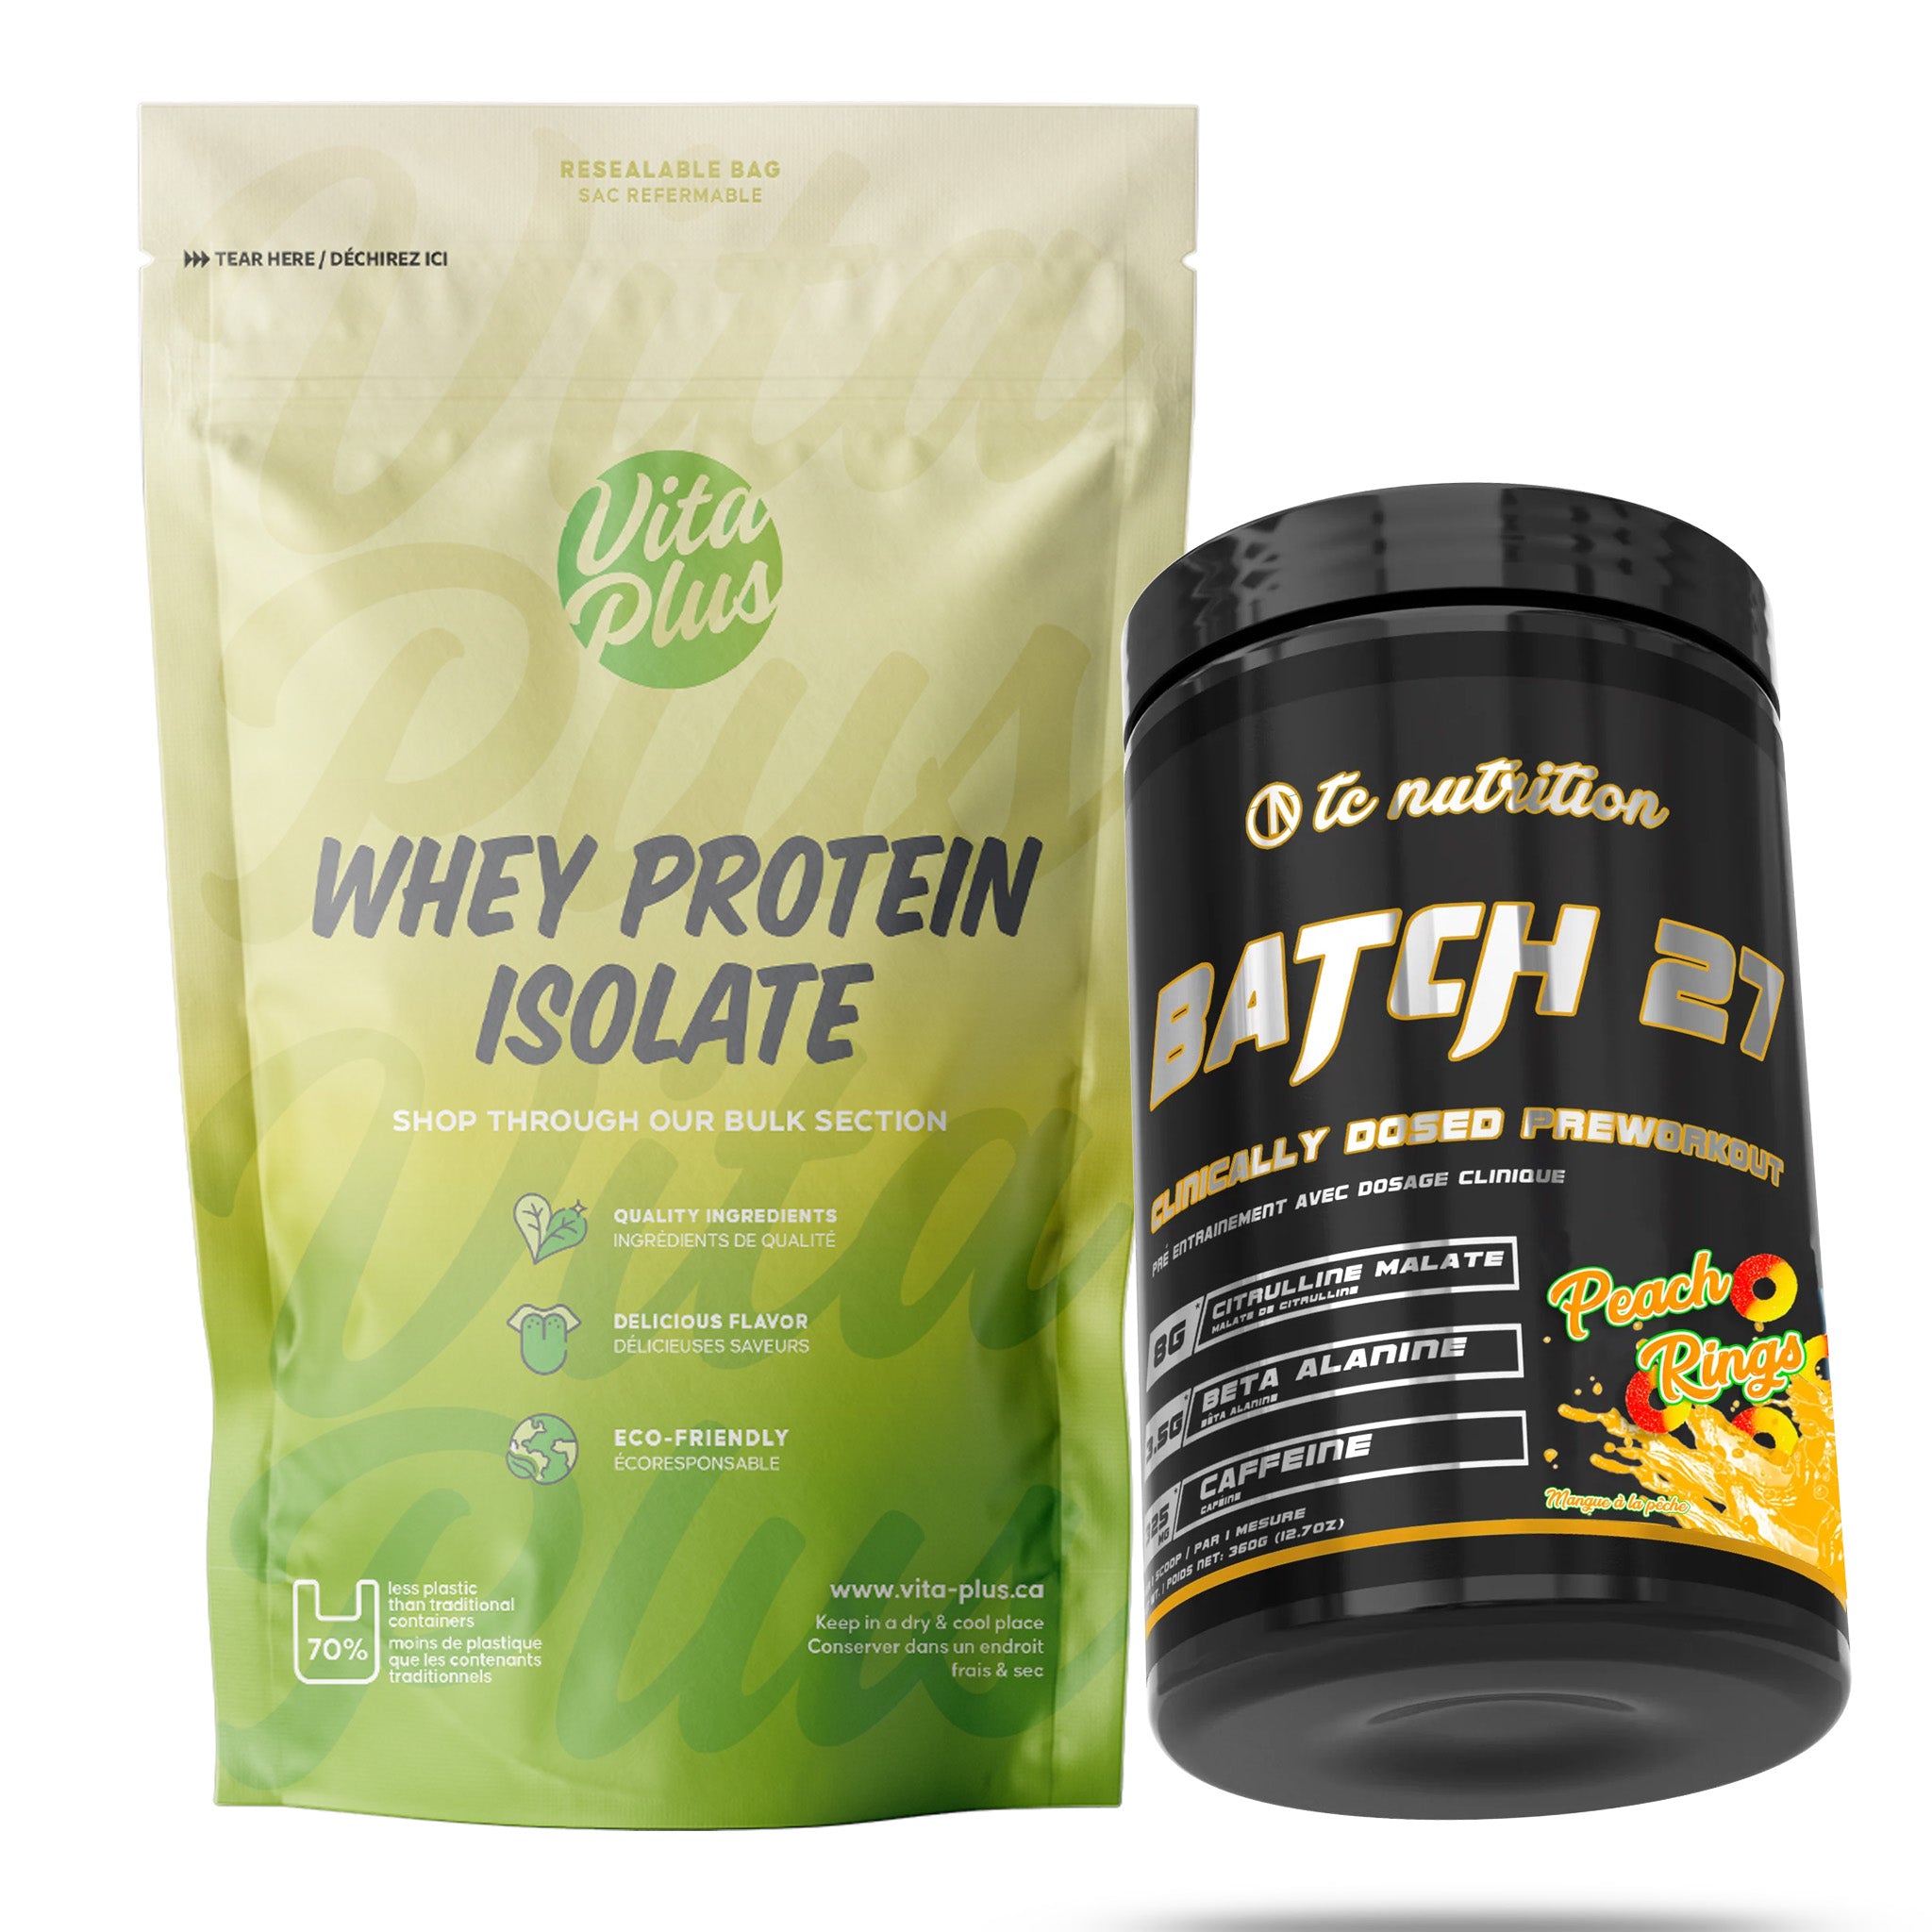 [COMBO] Whey Protein Isolate (5lb) + Batch 27 (40 Servings)